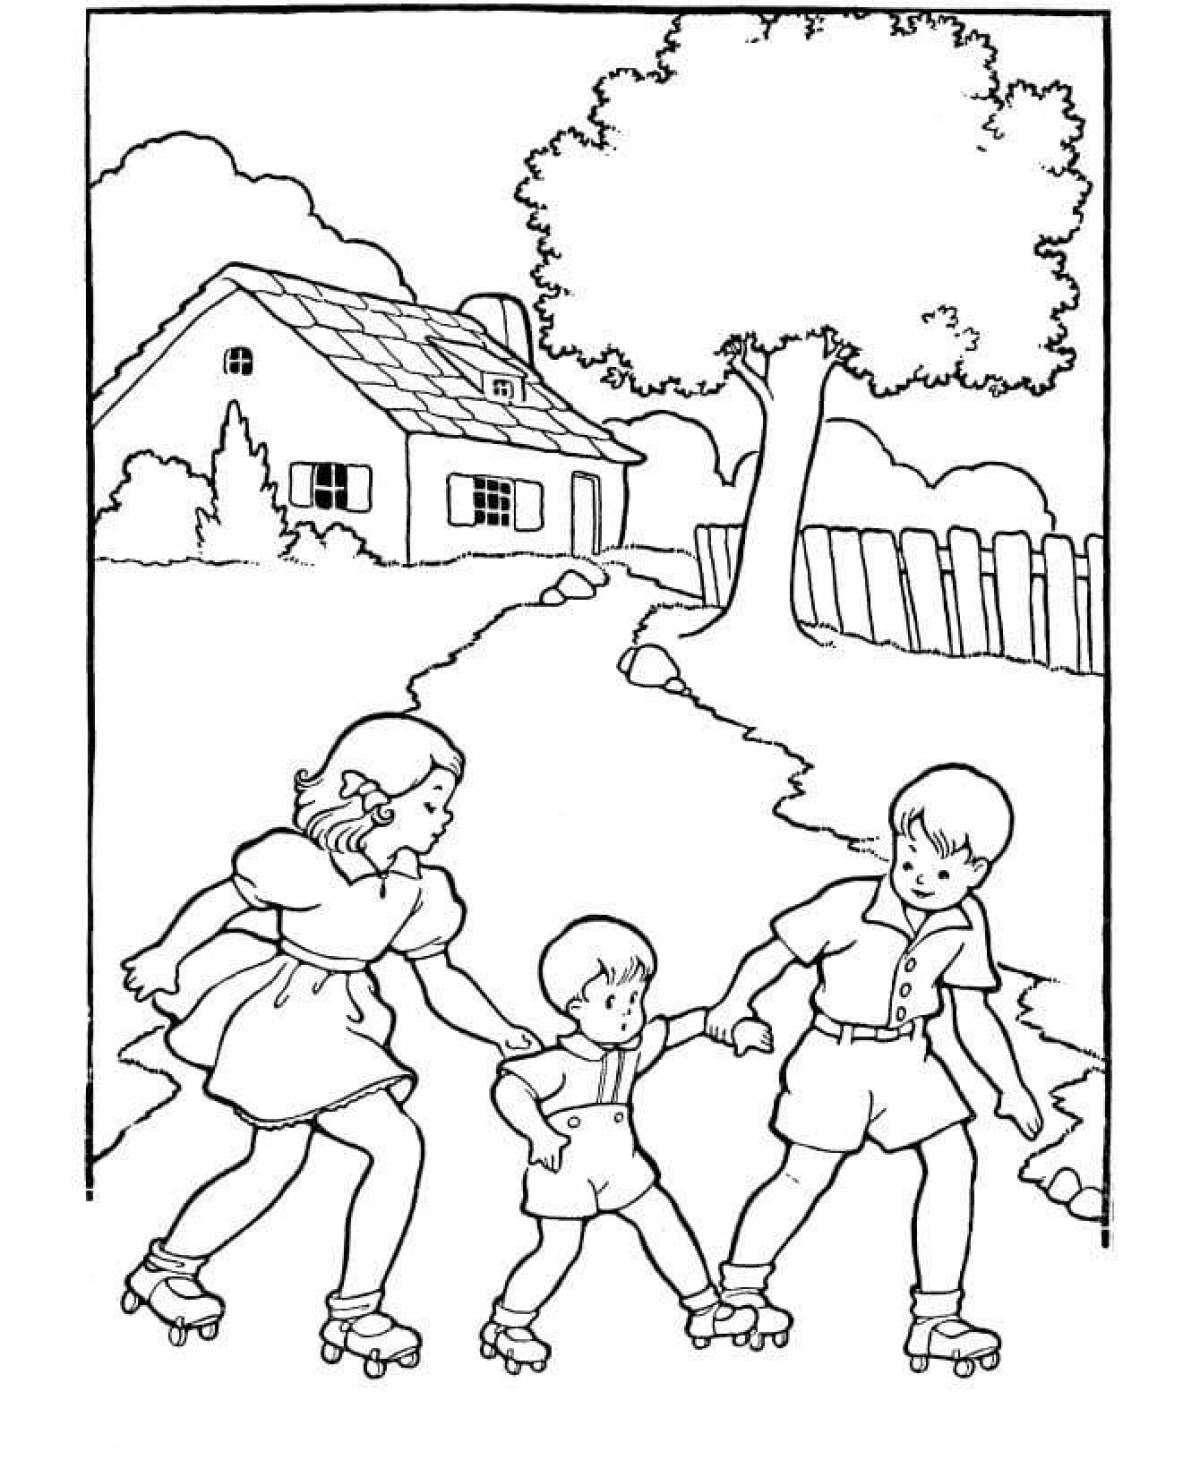 Coloring book cheerful childhood